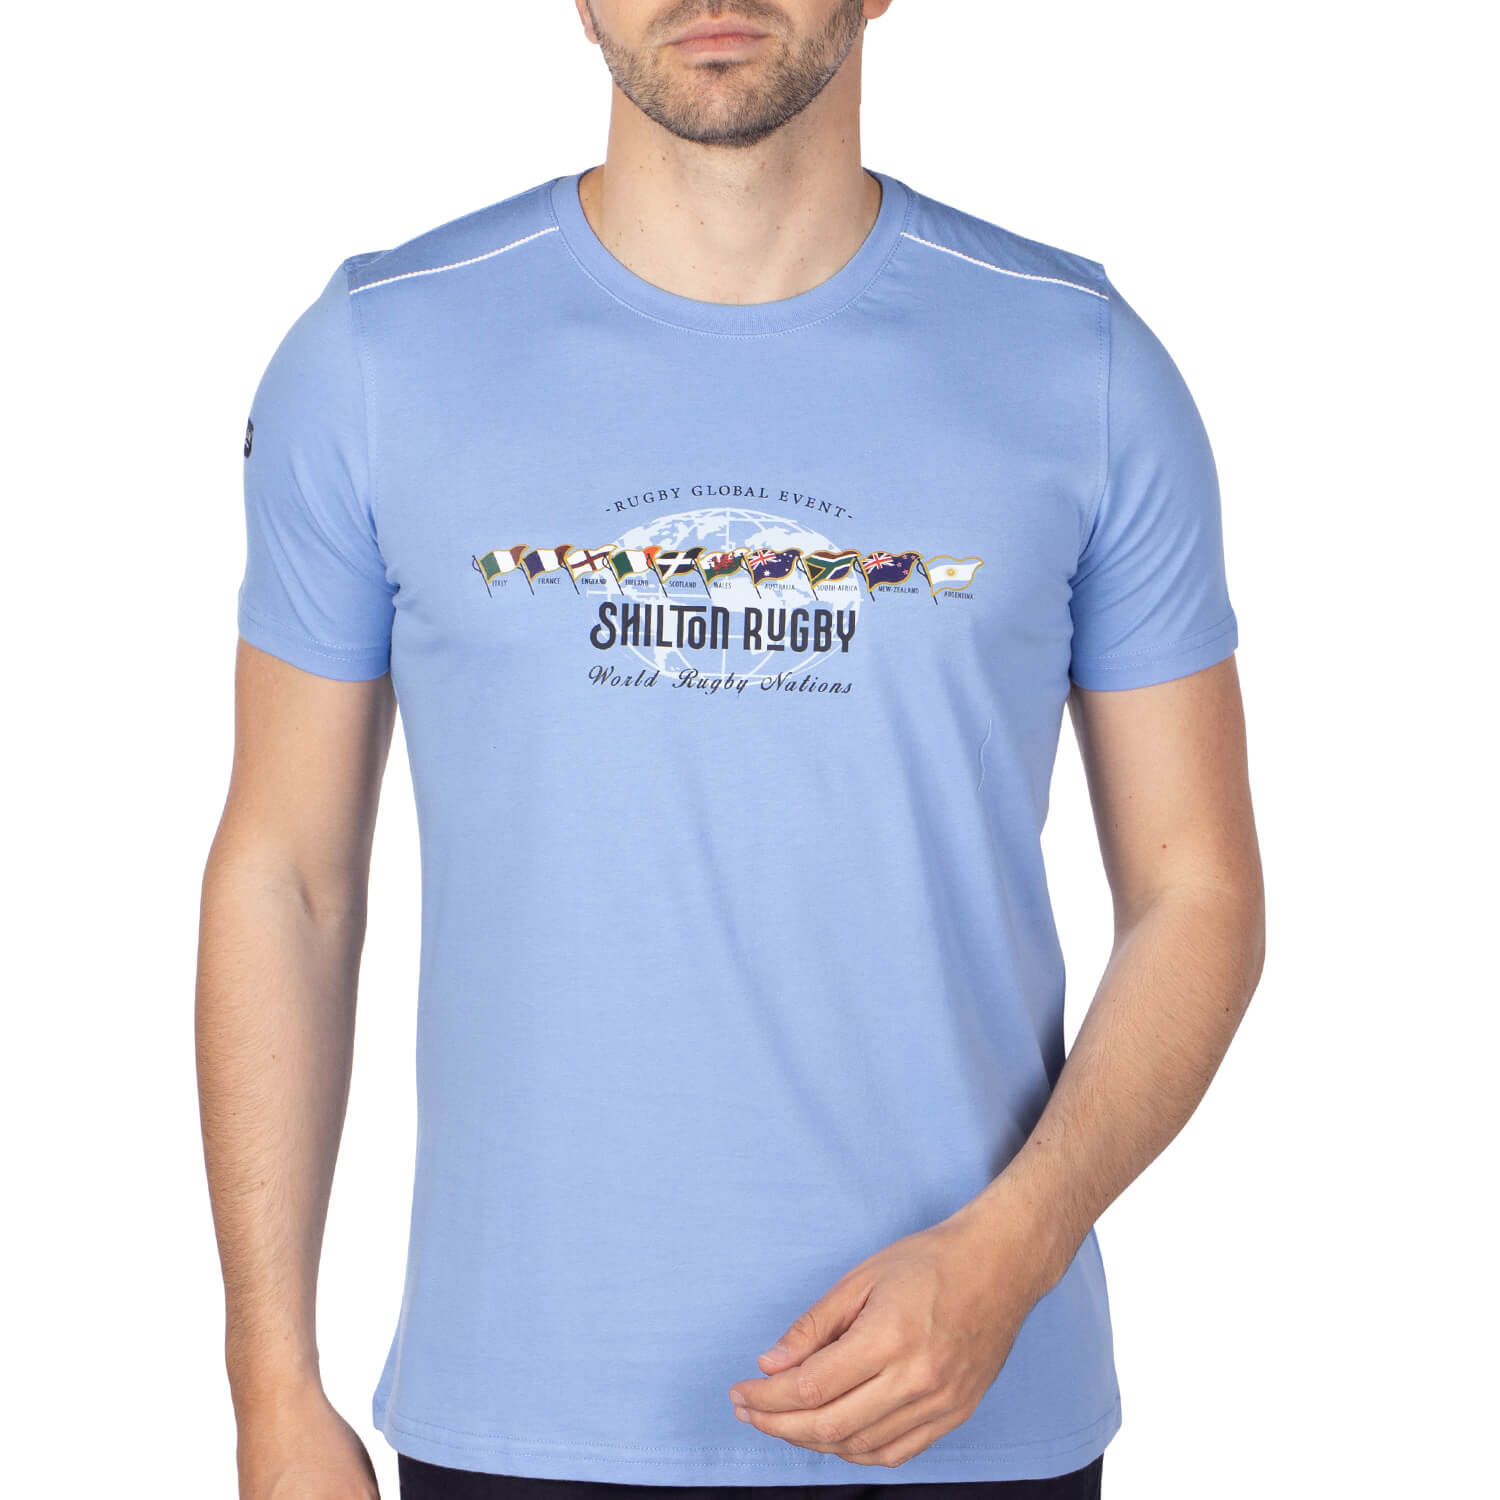 T-shirt rugby world nations